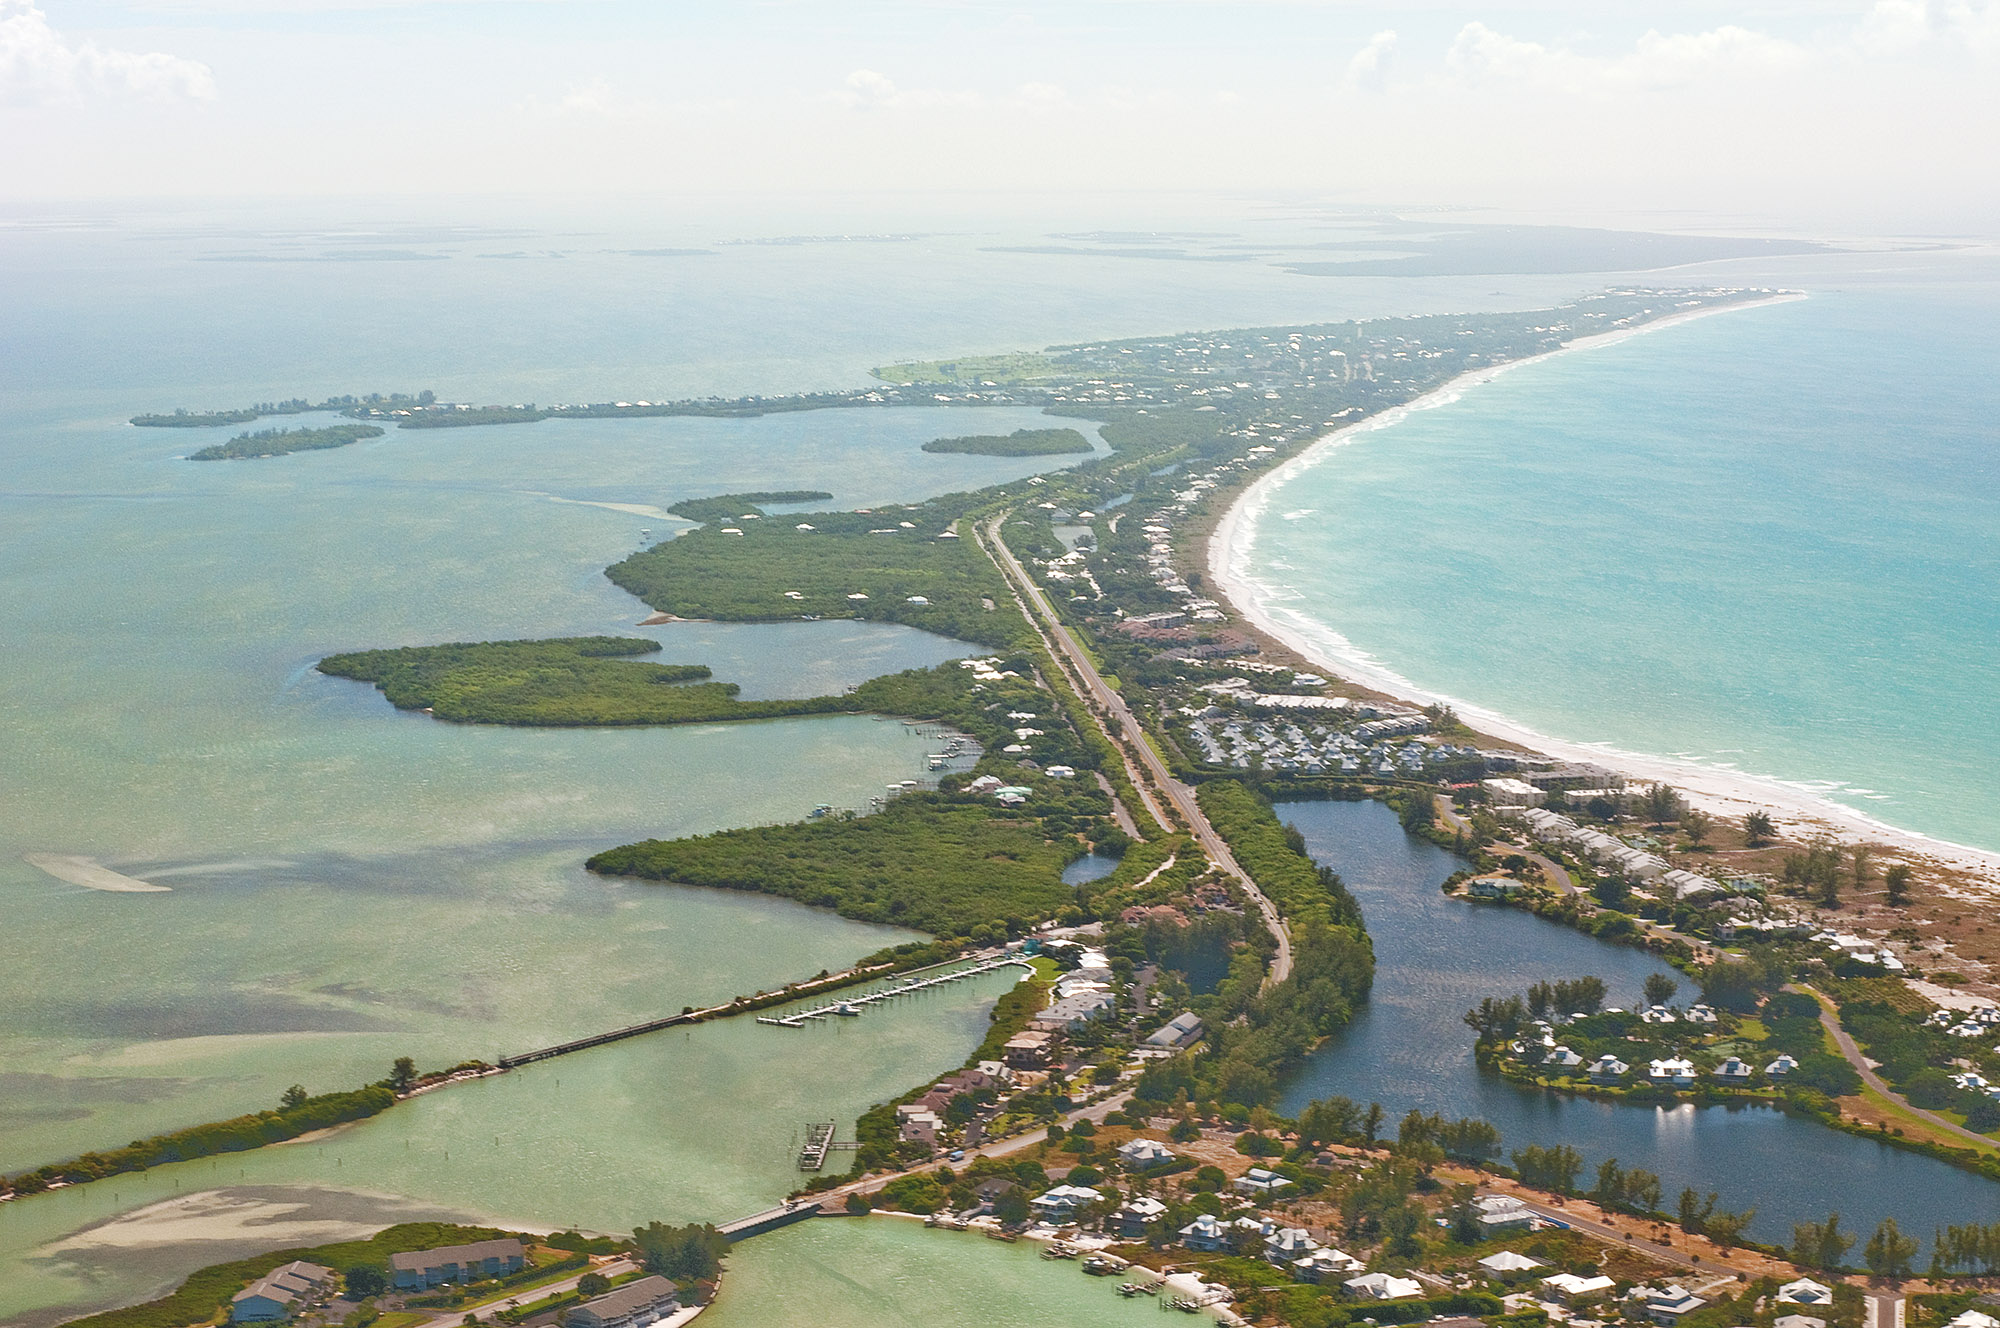 Aerial view of Gasparilla Island and Cayo Costa and the surrounding waters